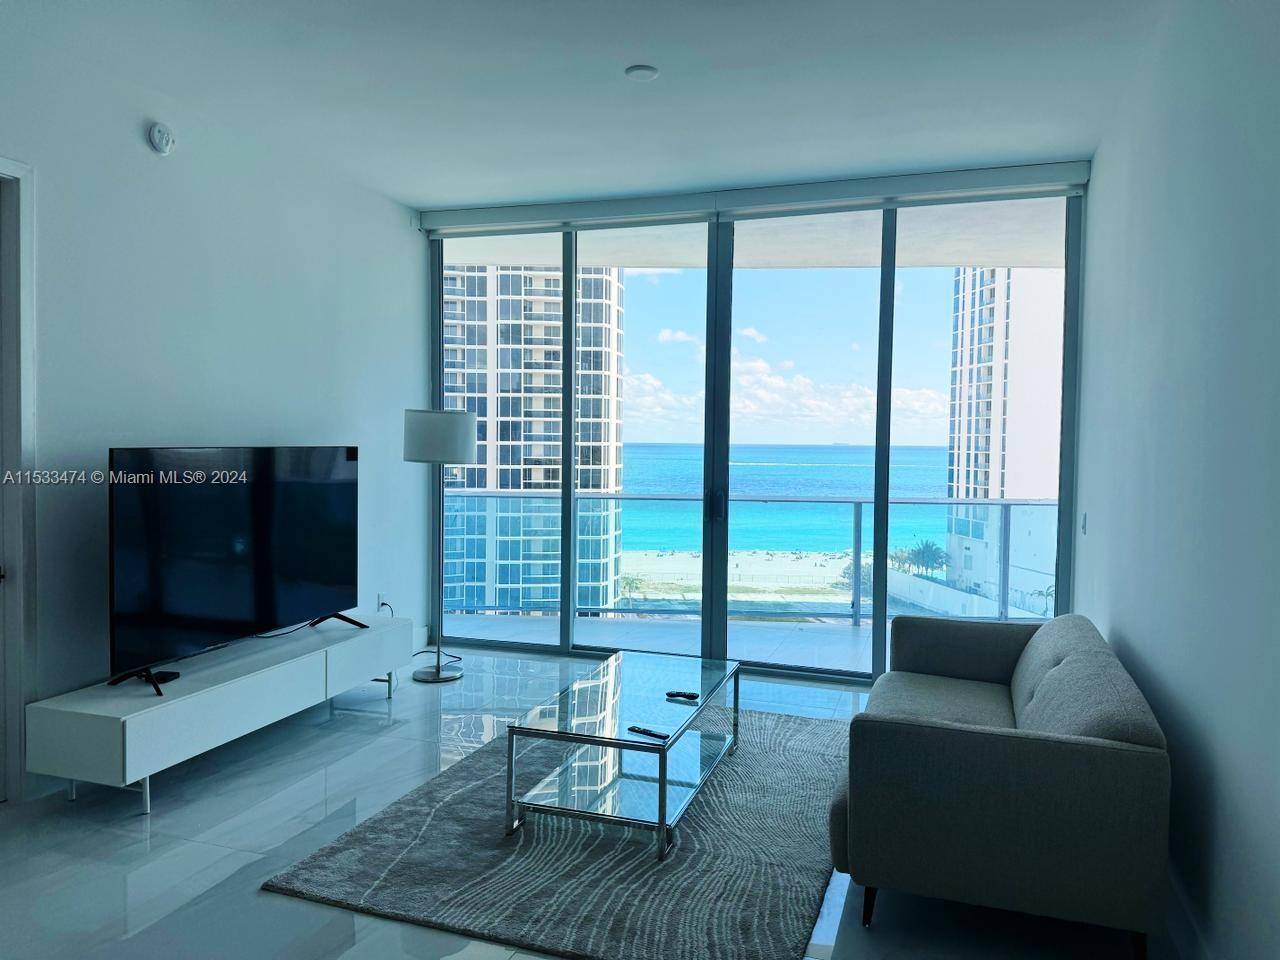 Beautiful brand new apartment 2 beds 2 1 2 baths, new boutique luxury building located in the heart of Sunny isles beach, fully furnished, amazing amenities, beach club, valet, pool, ...